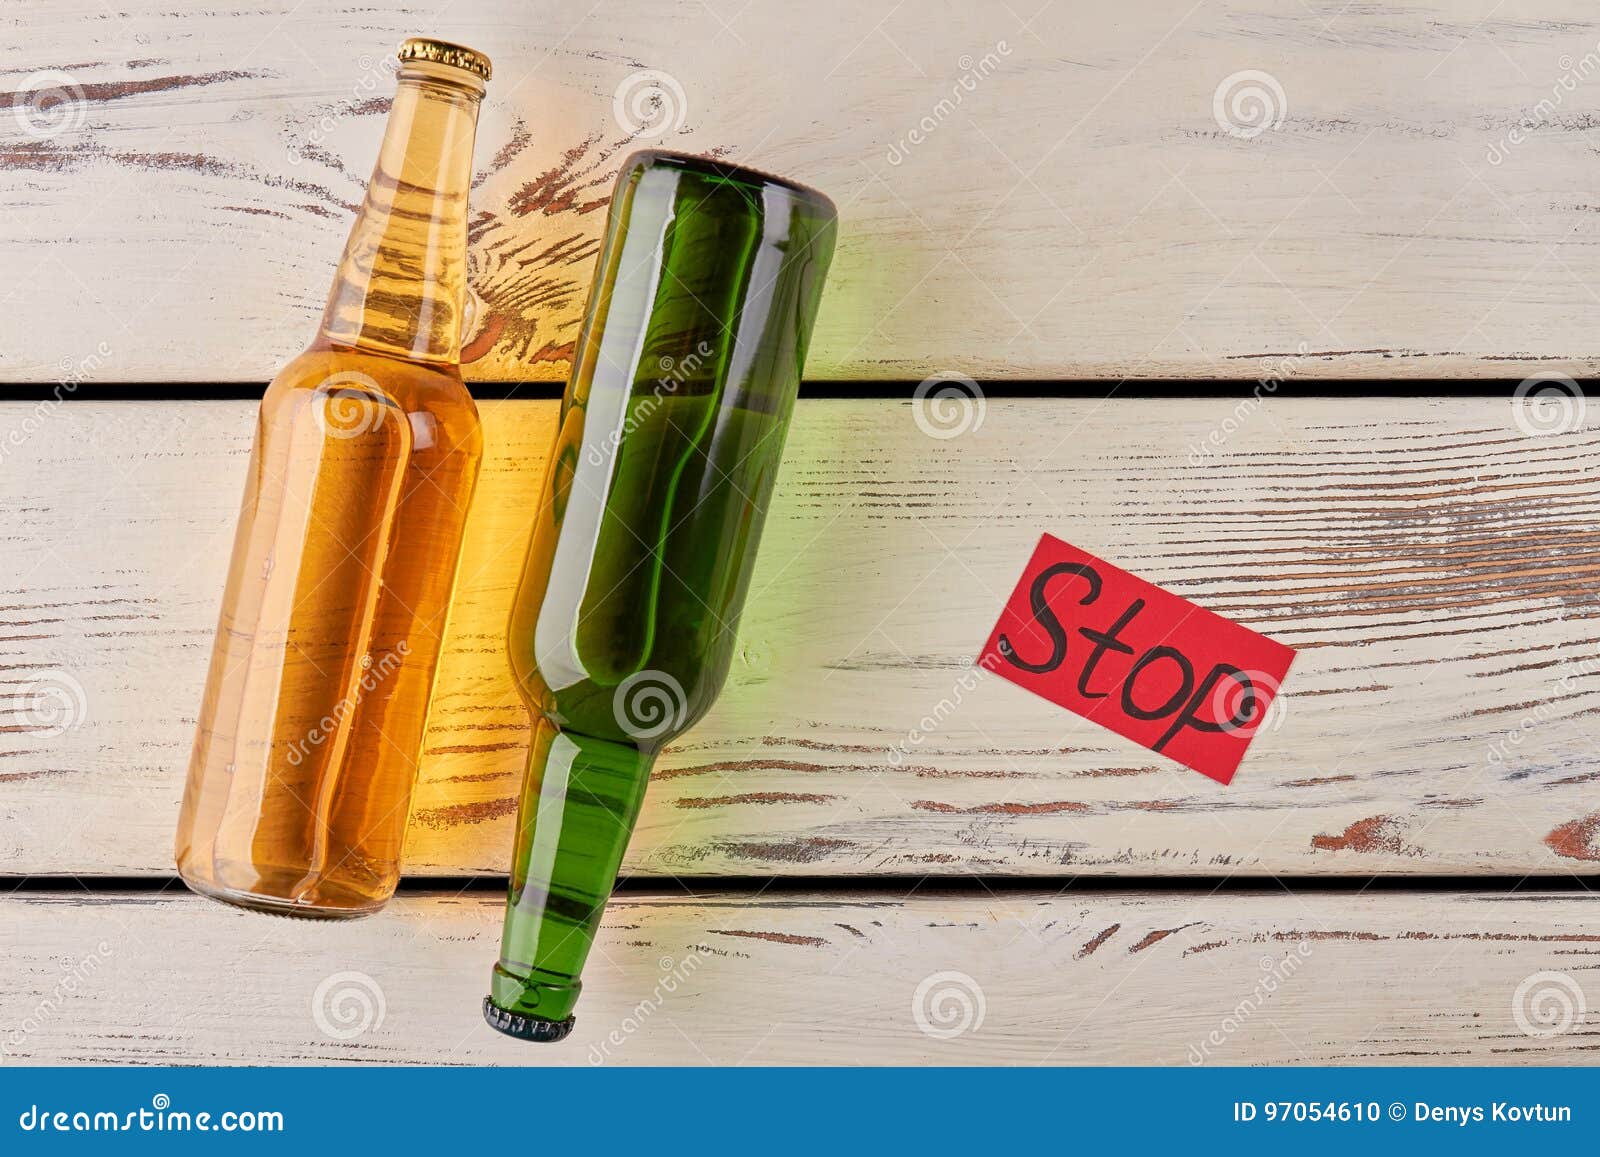 https://thumbs.dreamstime.com/z/sober-lifestyle-stop-drinking-alcohol-how-to-start-life-97054610.jpg